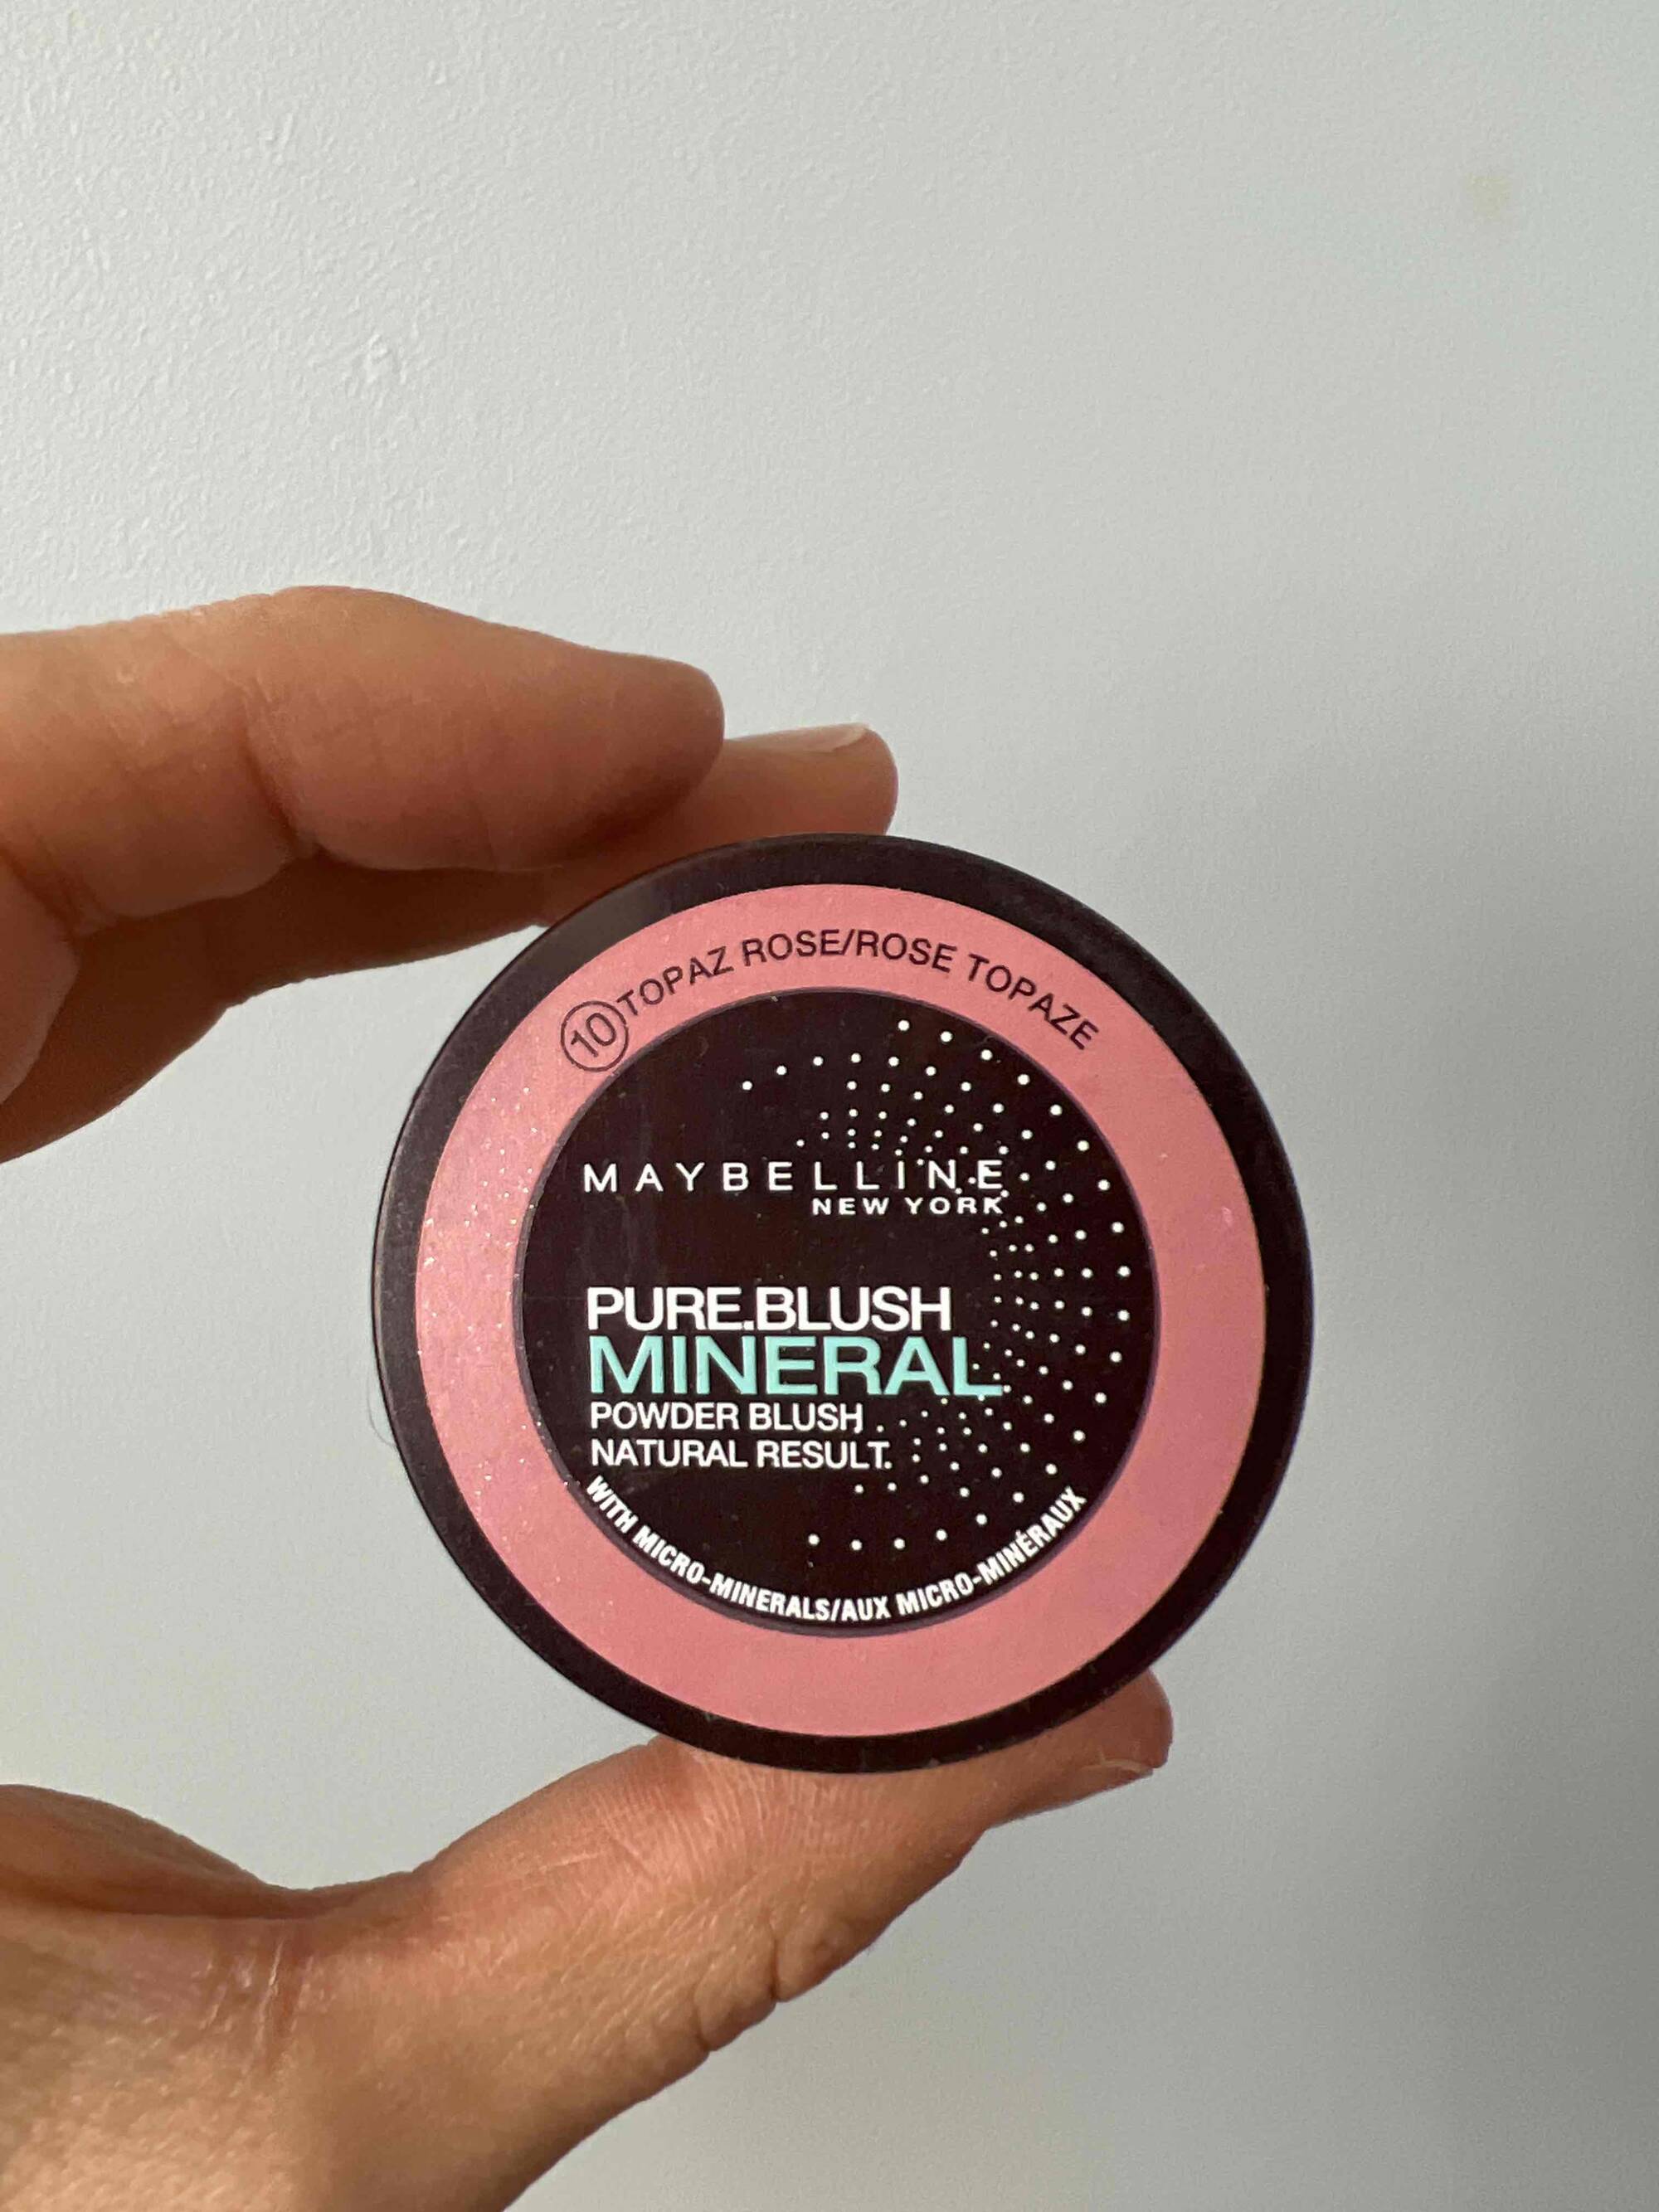 MAYBELLINE - Pure blush mineral